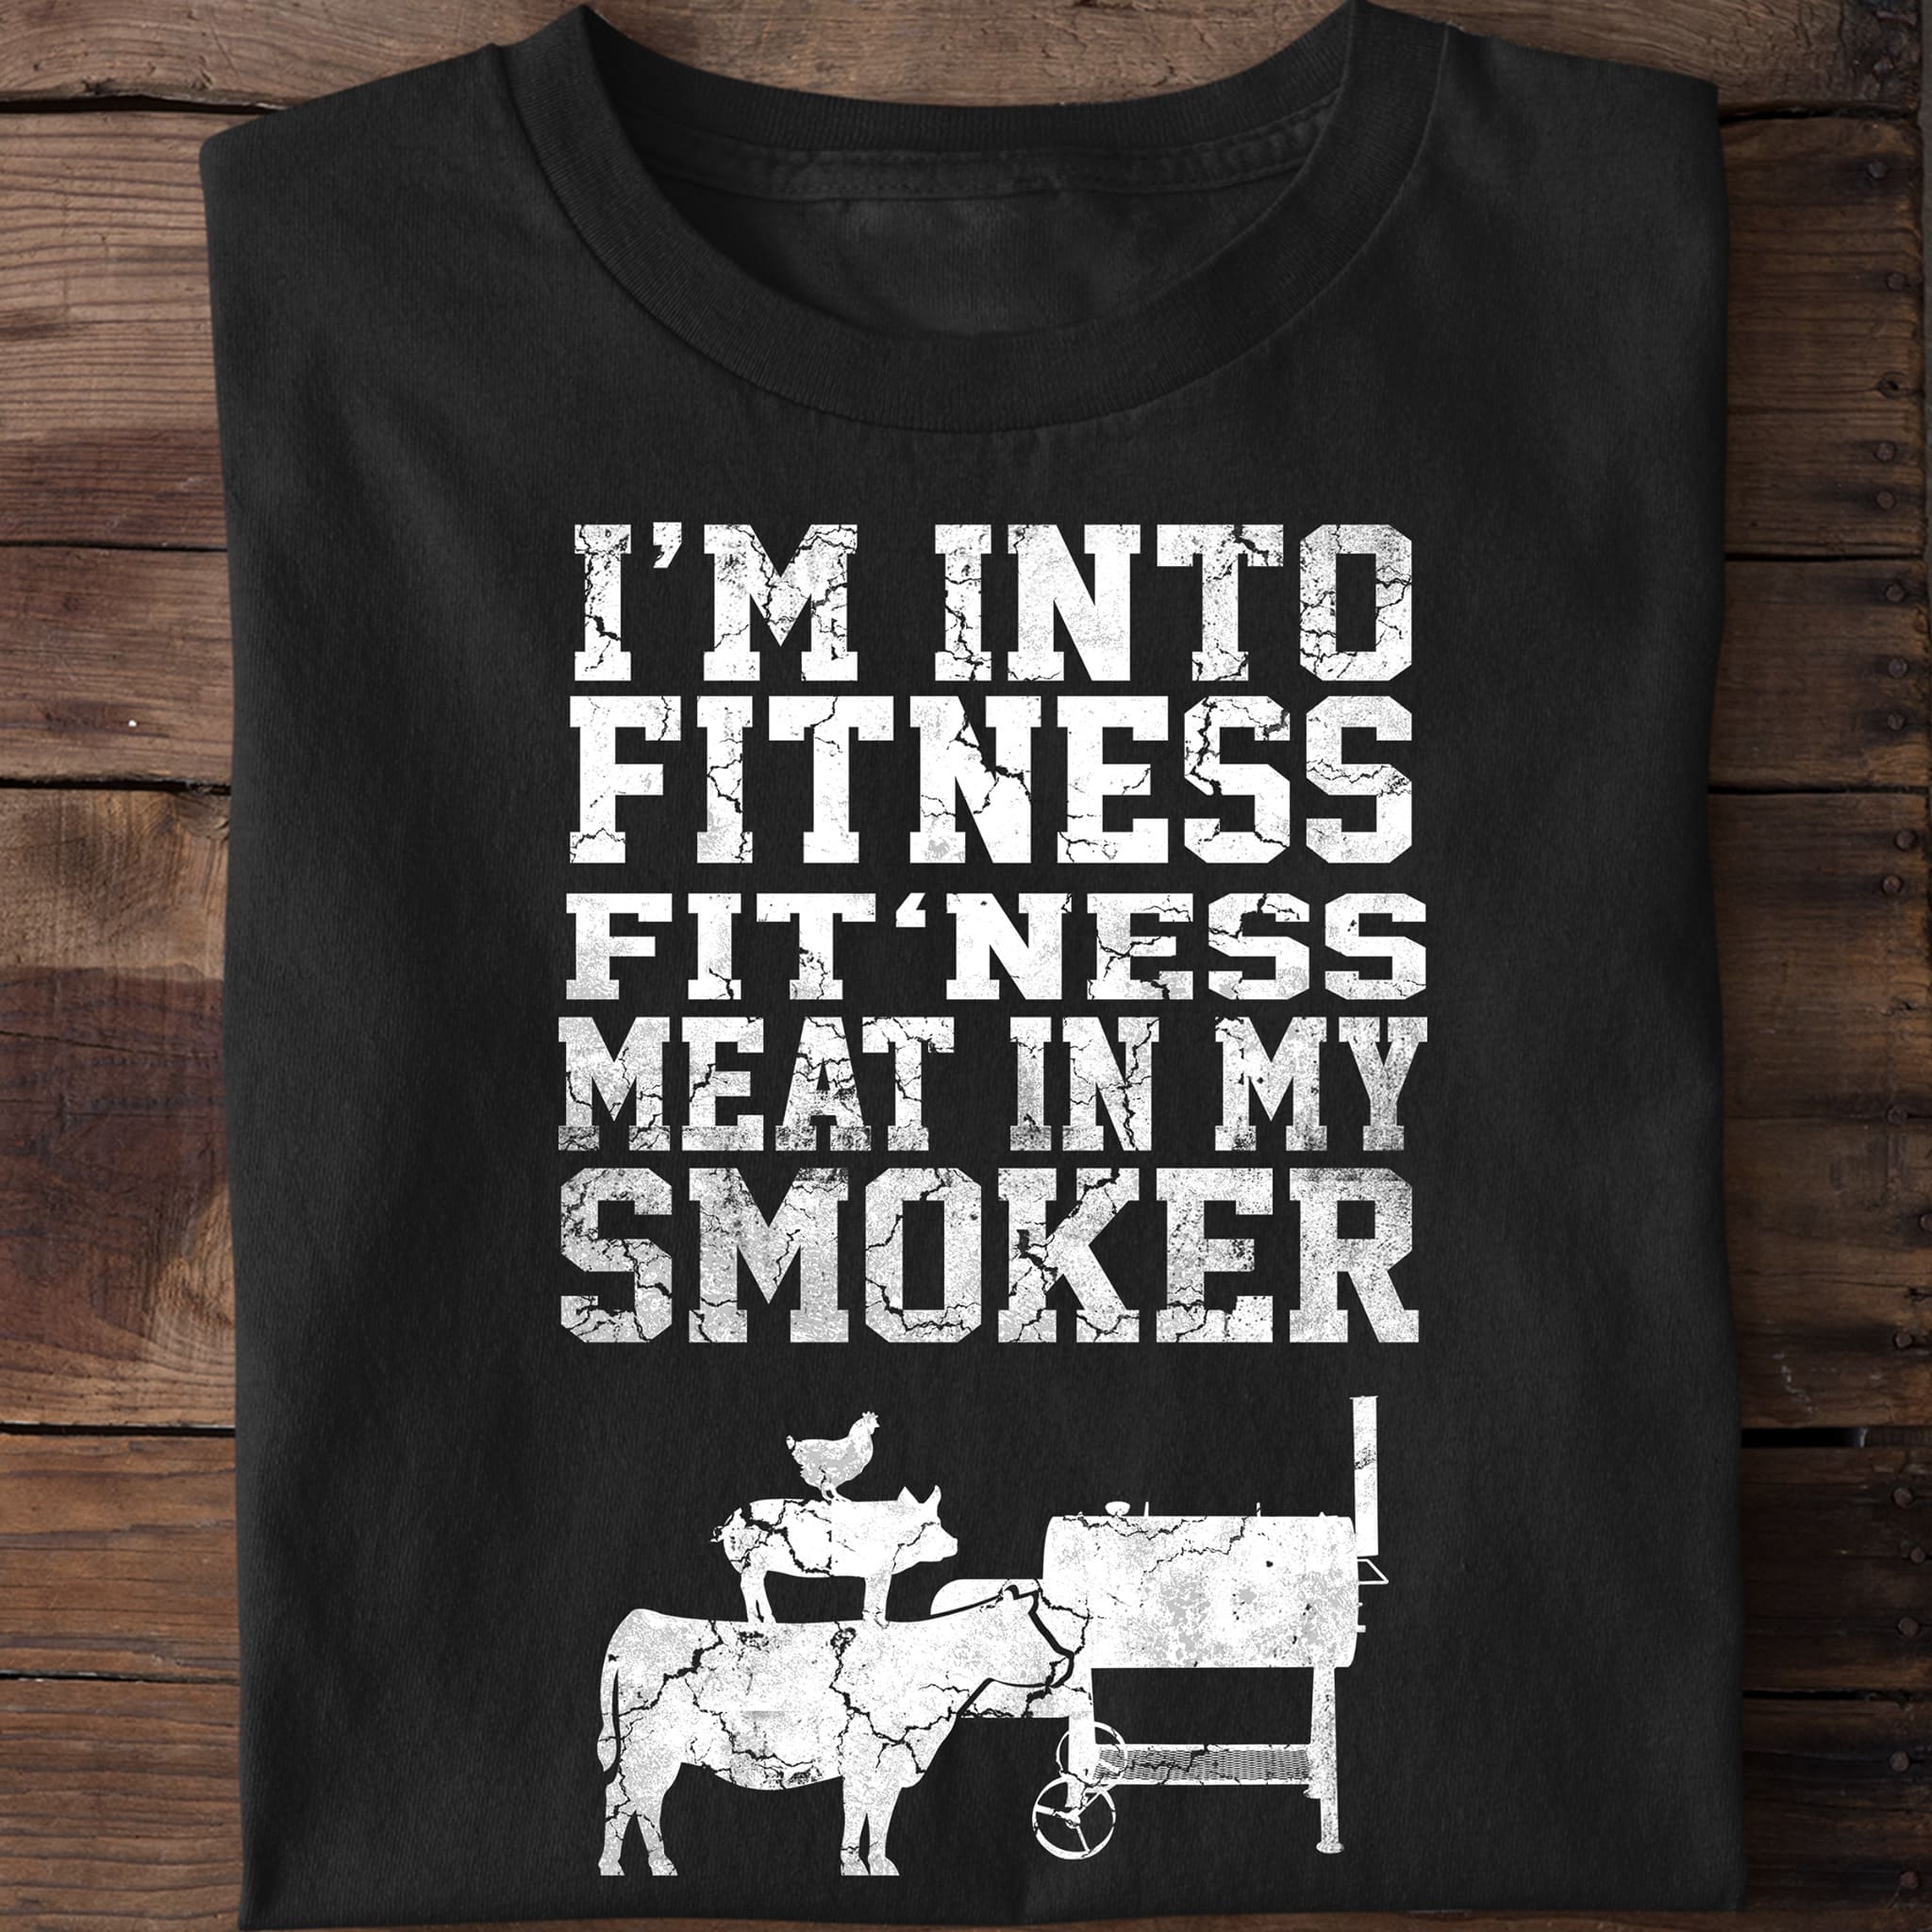 https://fridaystuff.com/wp-content/uploads/2021/12/Im-into-fitness-fitness-meat-in-smoker-Grilled-meat-T-shirt.jpg